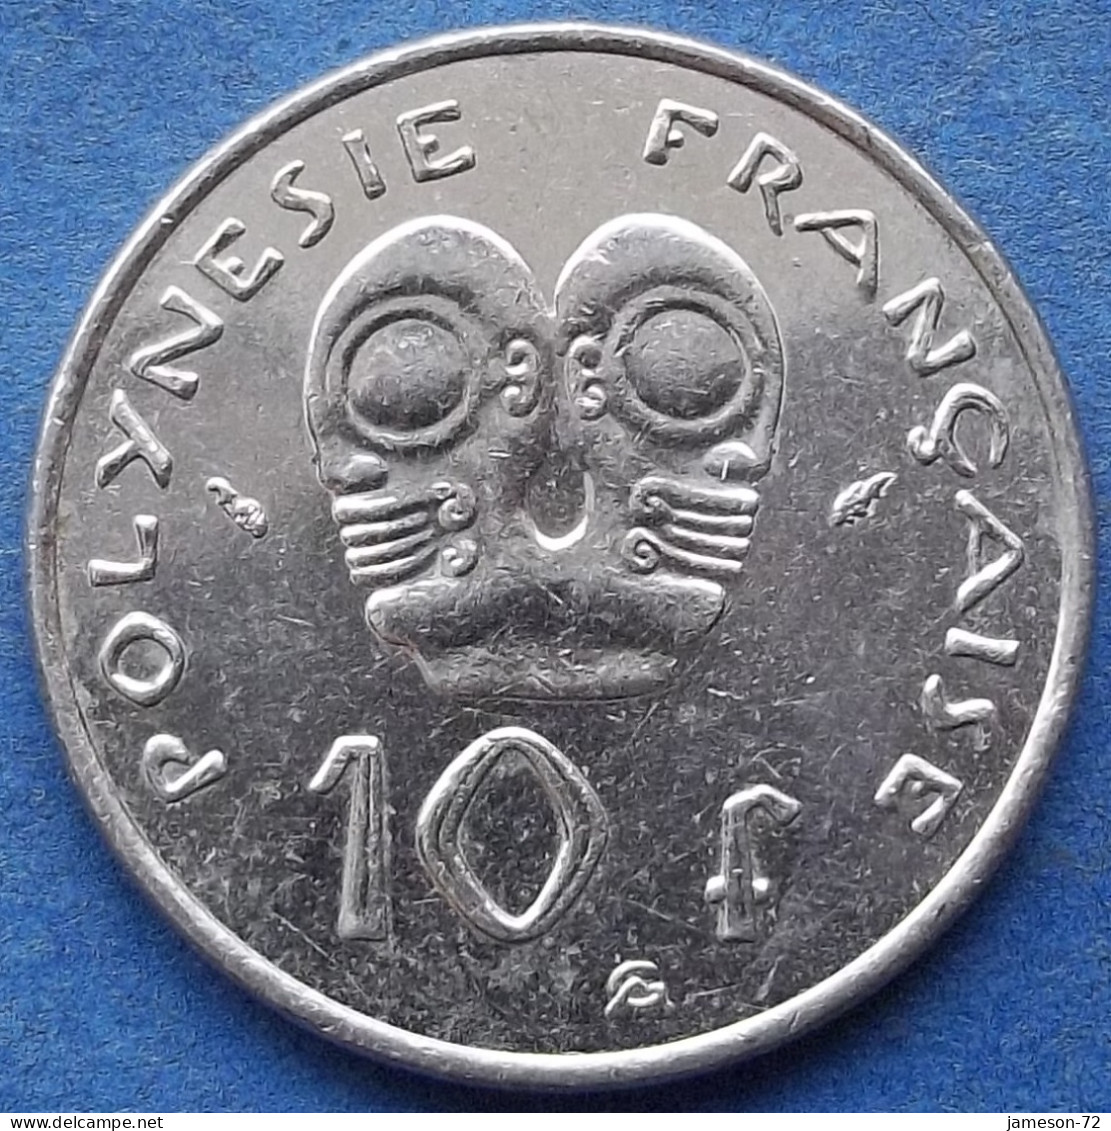 FRENCH POLYNESIA - 10 Francs 1991 KM# 8 French Overseas Territory - Edelweiss Coins - Polinesia Francese